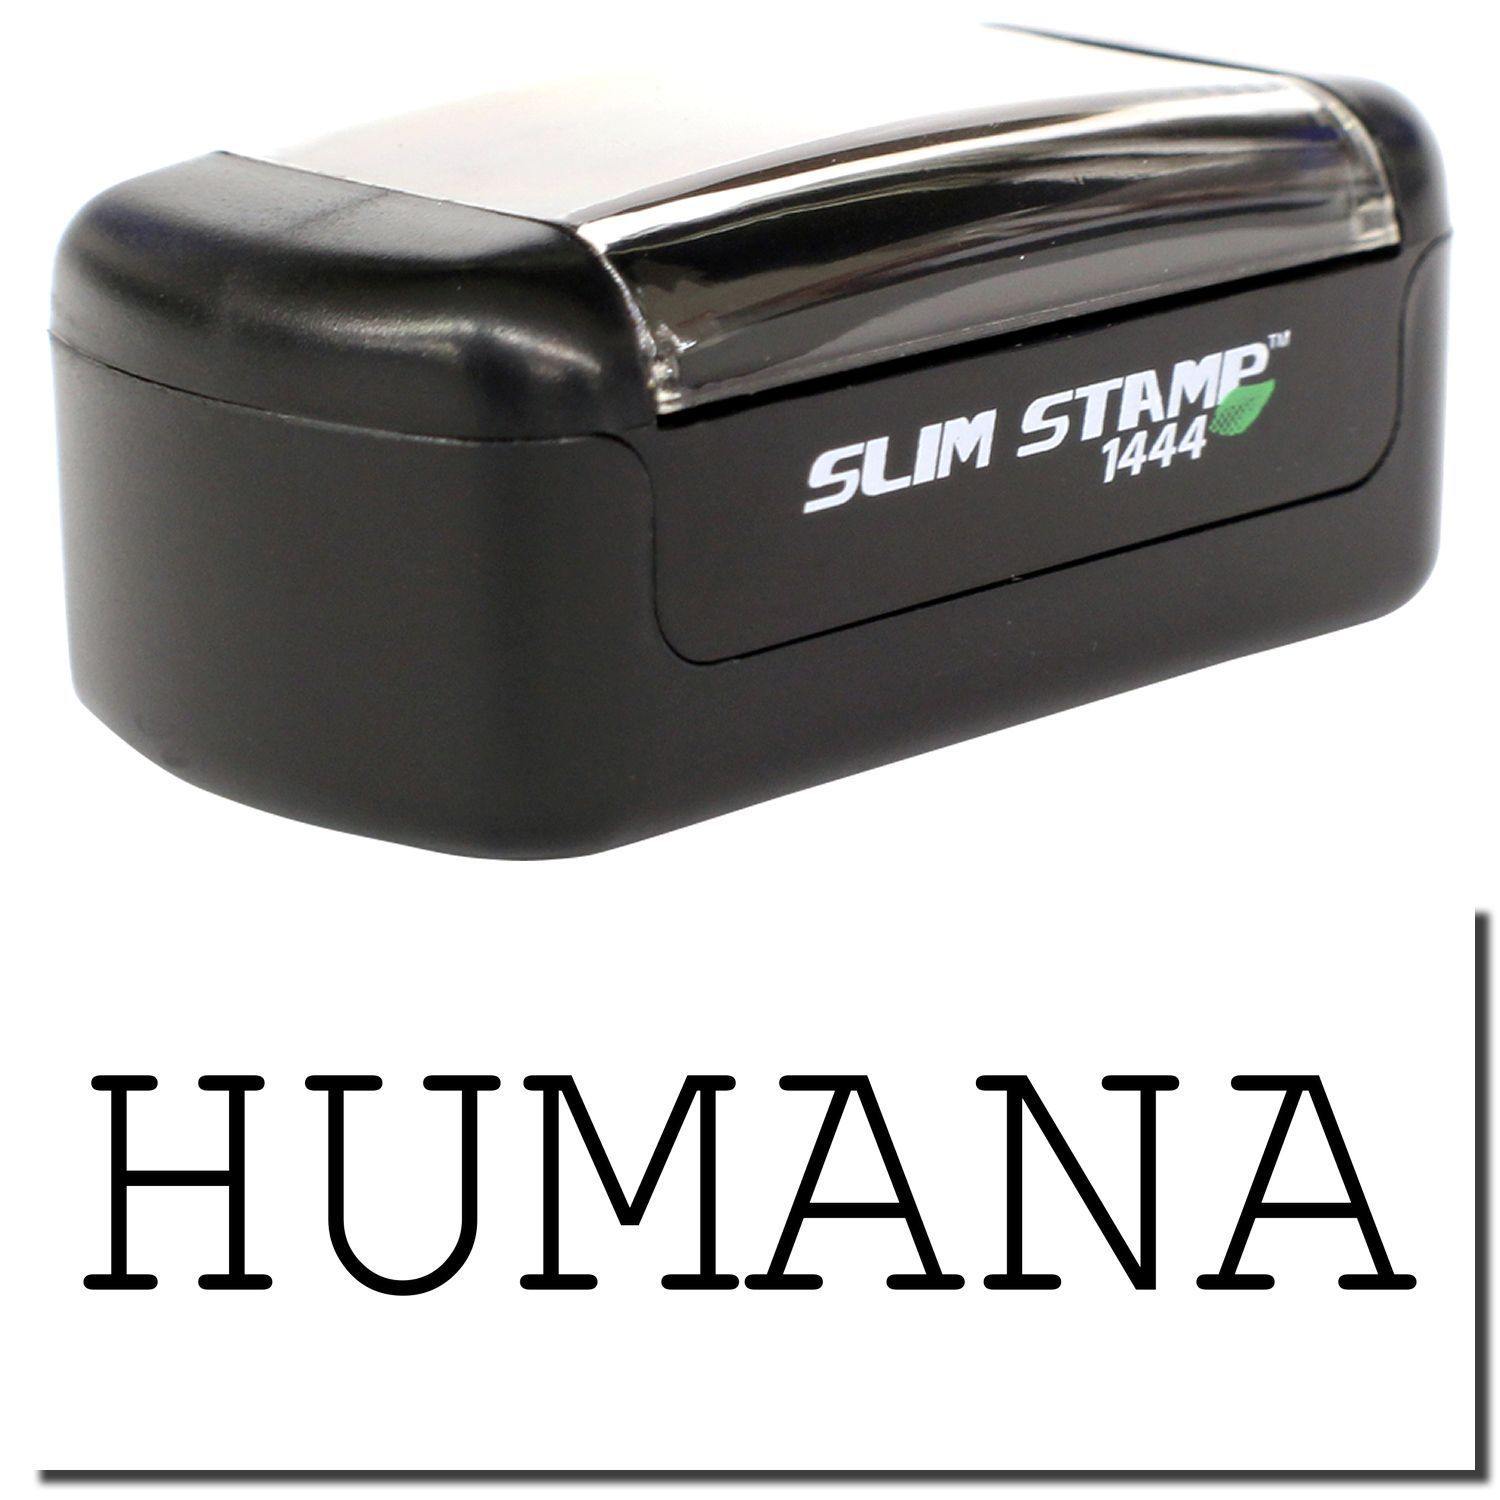 A stock office pre-inked stamp with a stamped image showing how the text "HUMANA" is displayed after stamping.